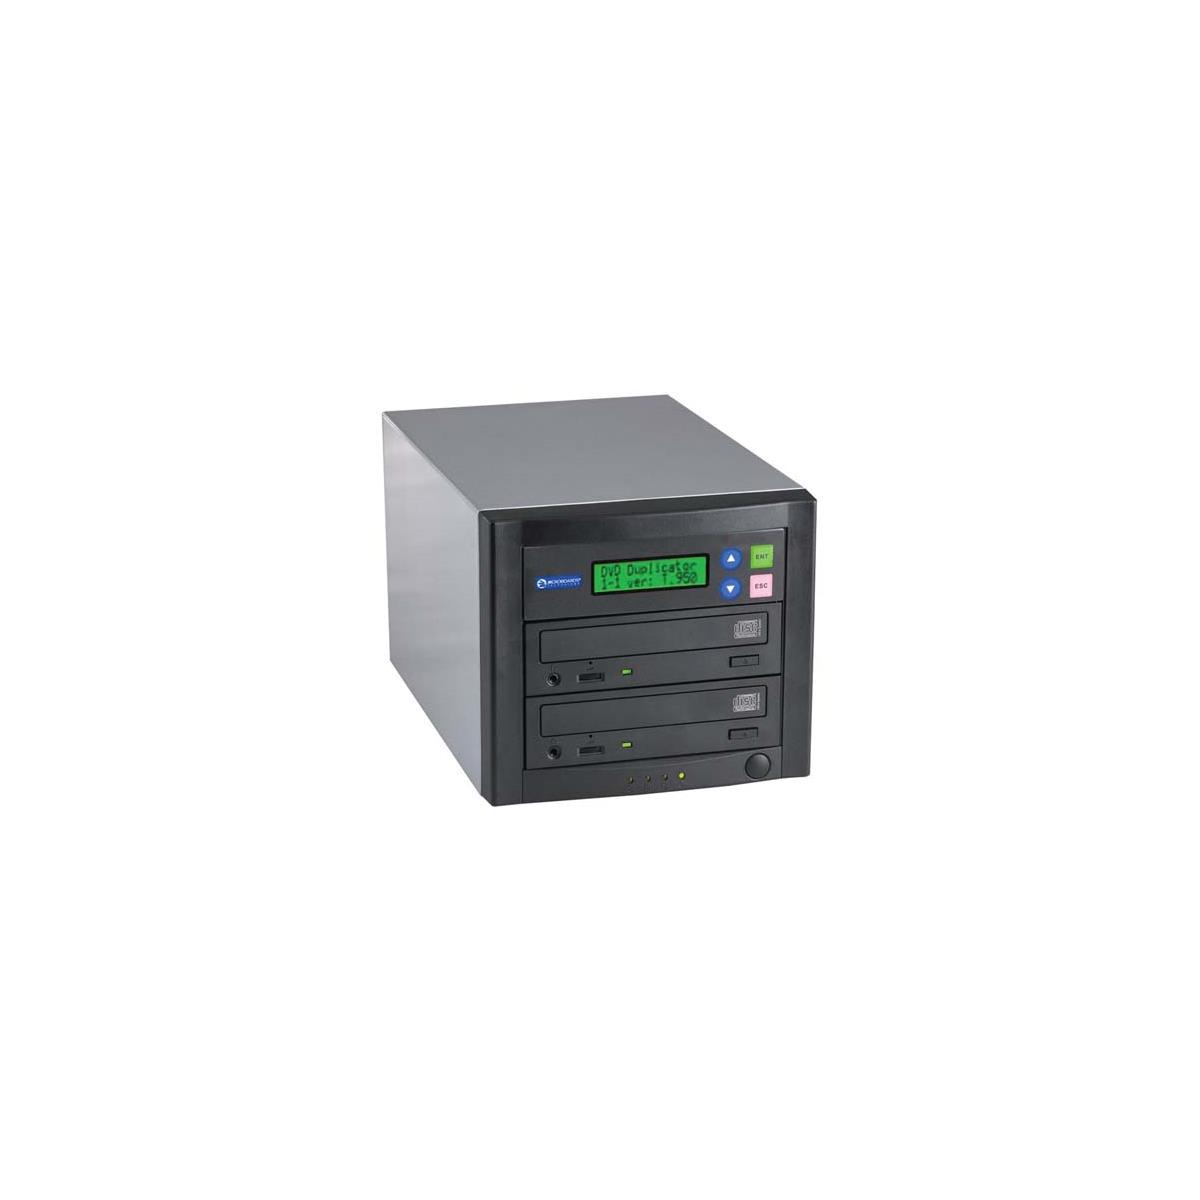 Image of Microboards Technology Quick Disc DVD 1 to 1 Stand Alone DVD/CD Duplicator